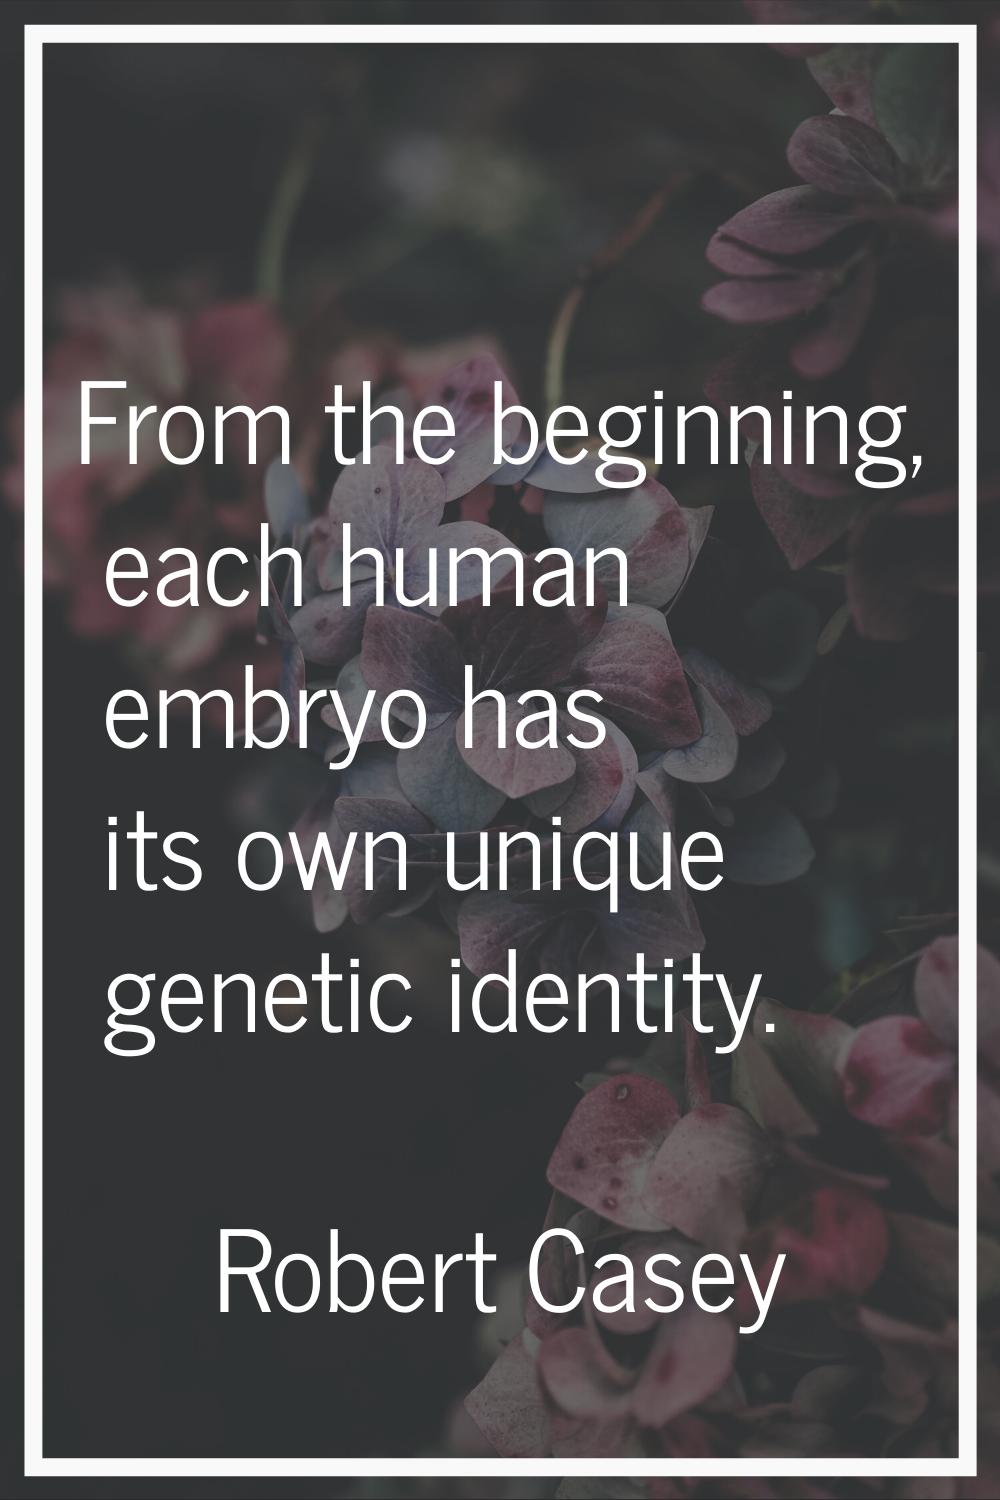 From the beginning, each human embryo has its own unique genetic identity.